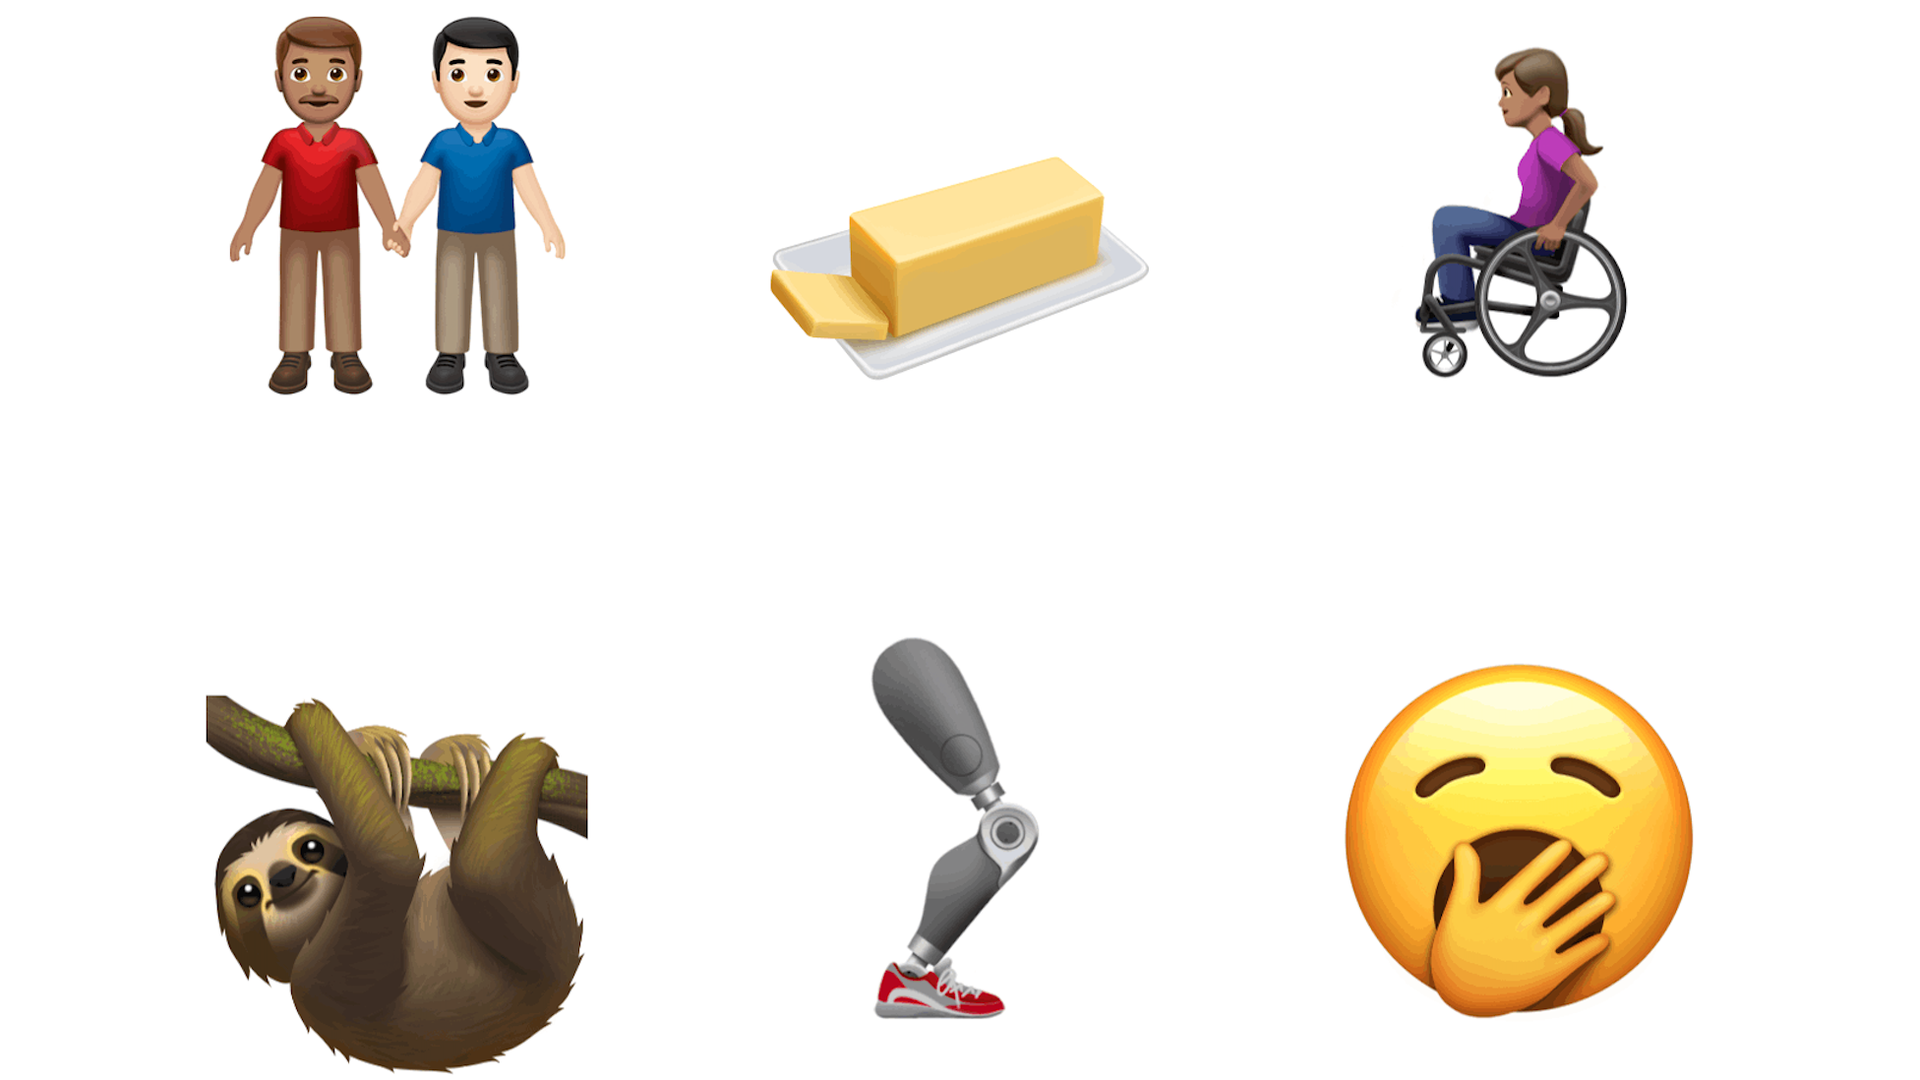 Pictures of emojis